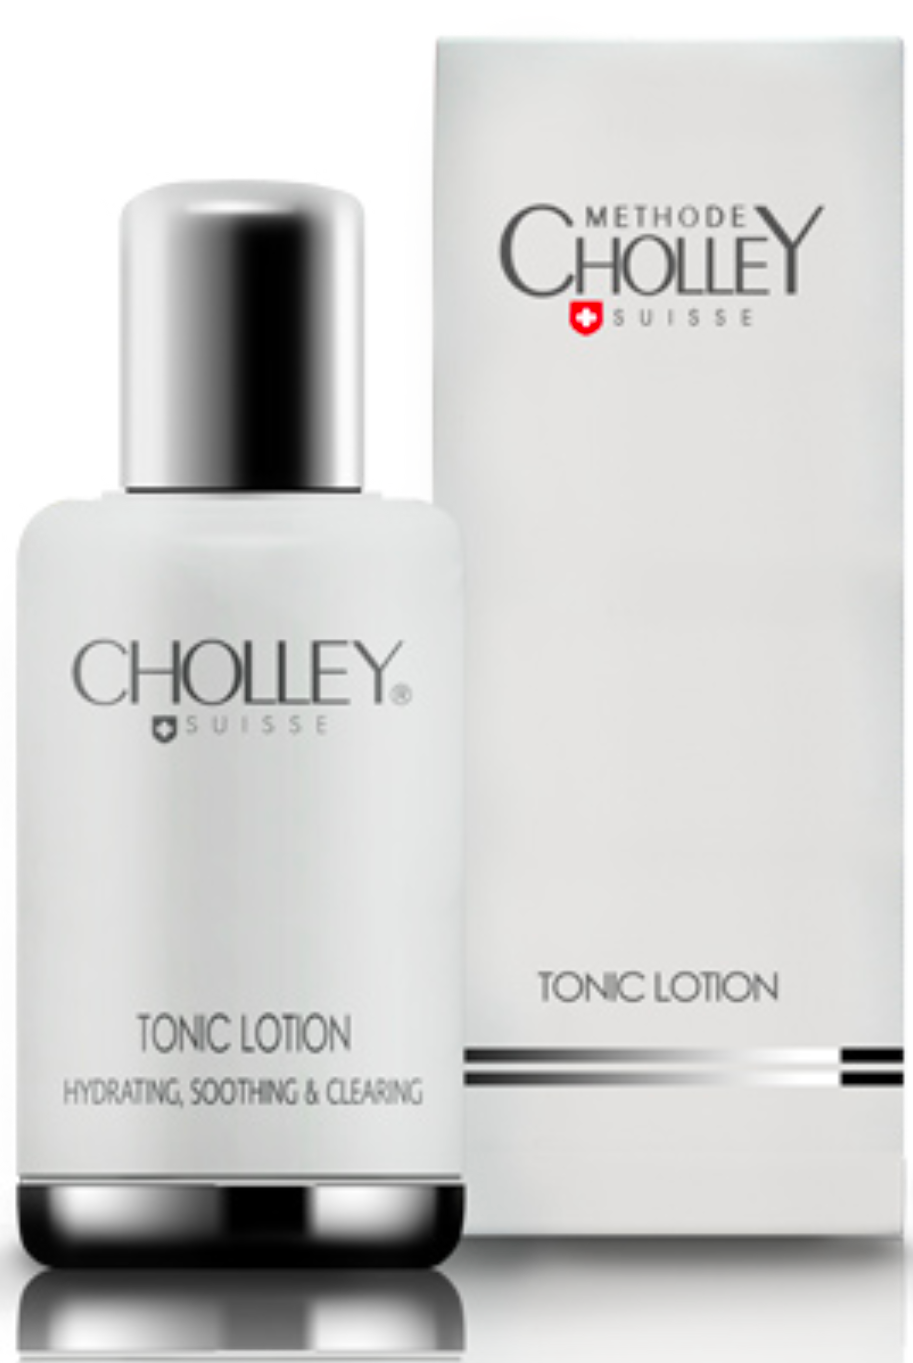 Methode Cholley 皇室醒膚美肌液 Cholley® Tonic Lotion (Clearing & Soothing)